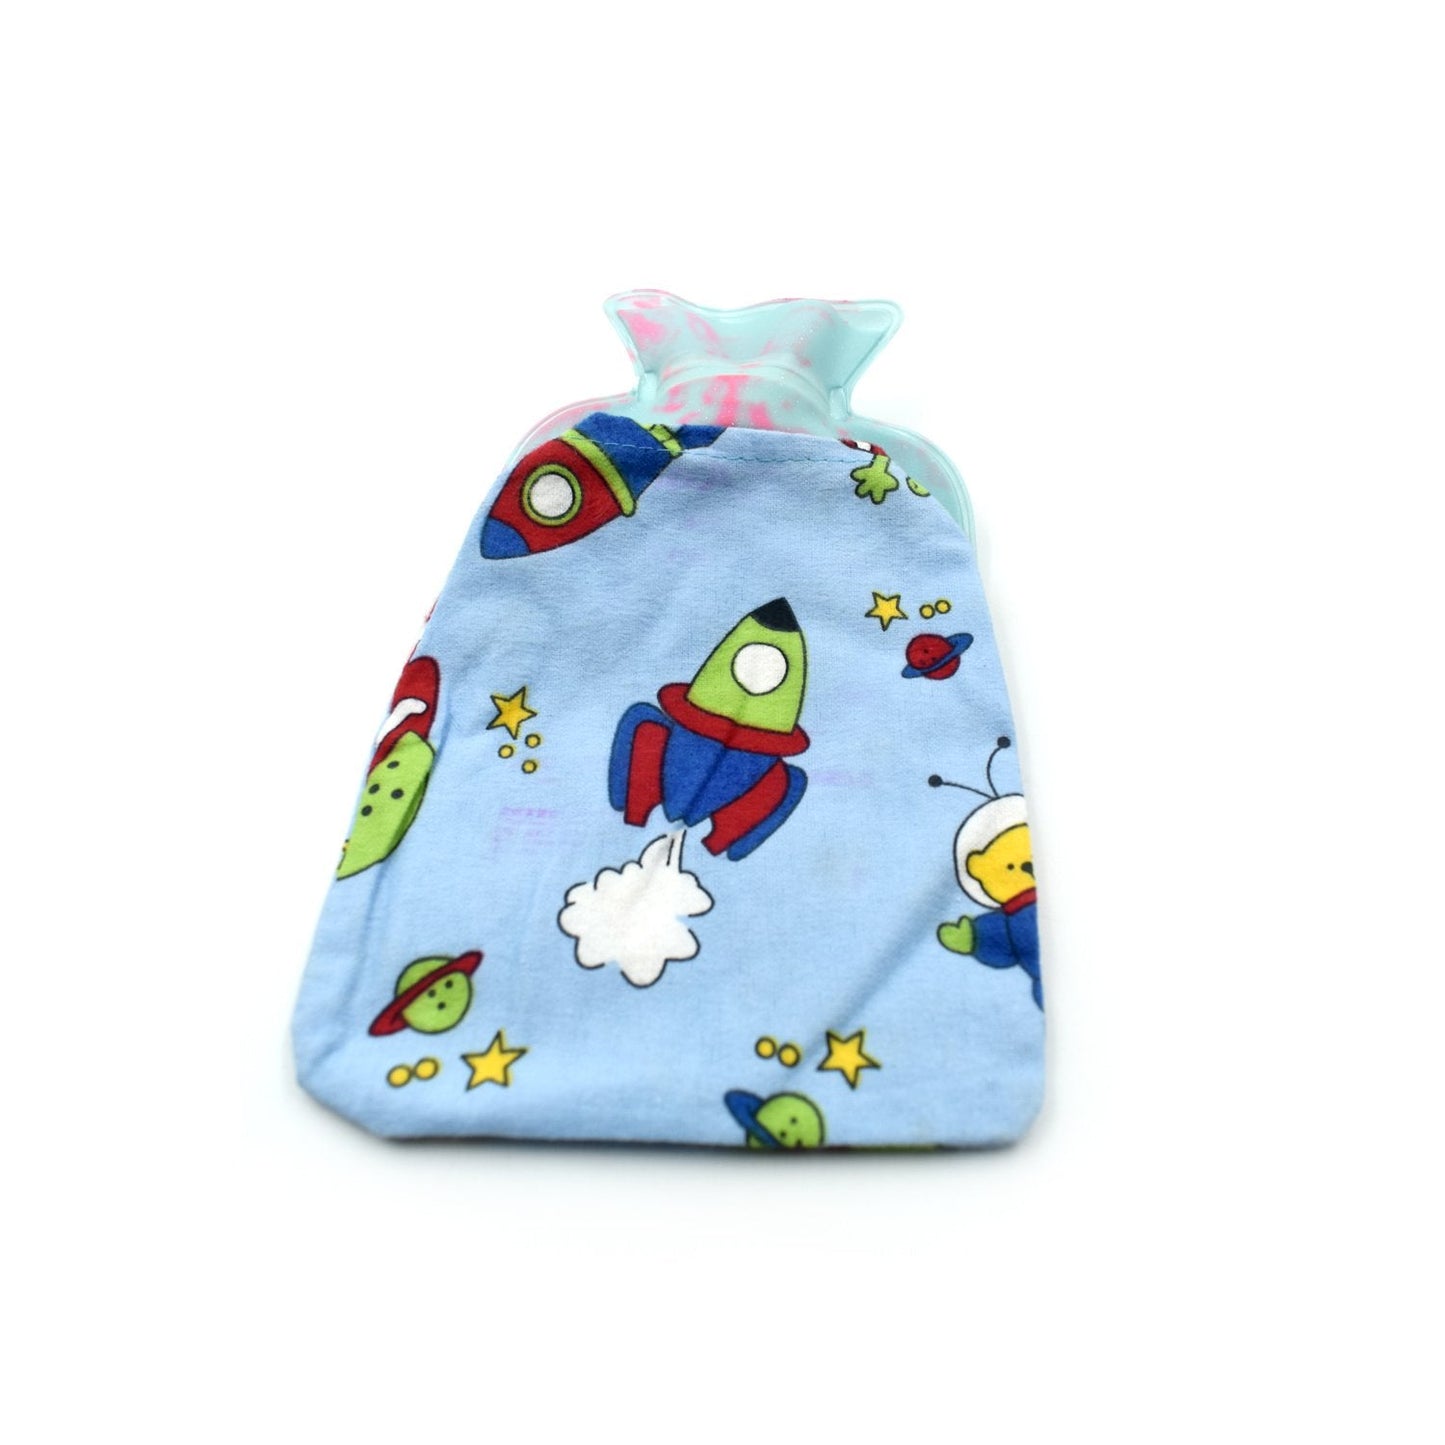 Hot Water Bottle Bag For Pain Relief